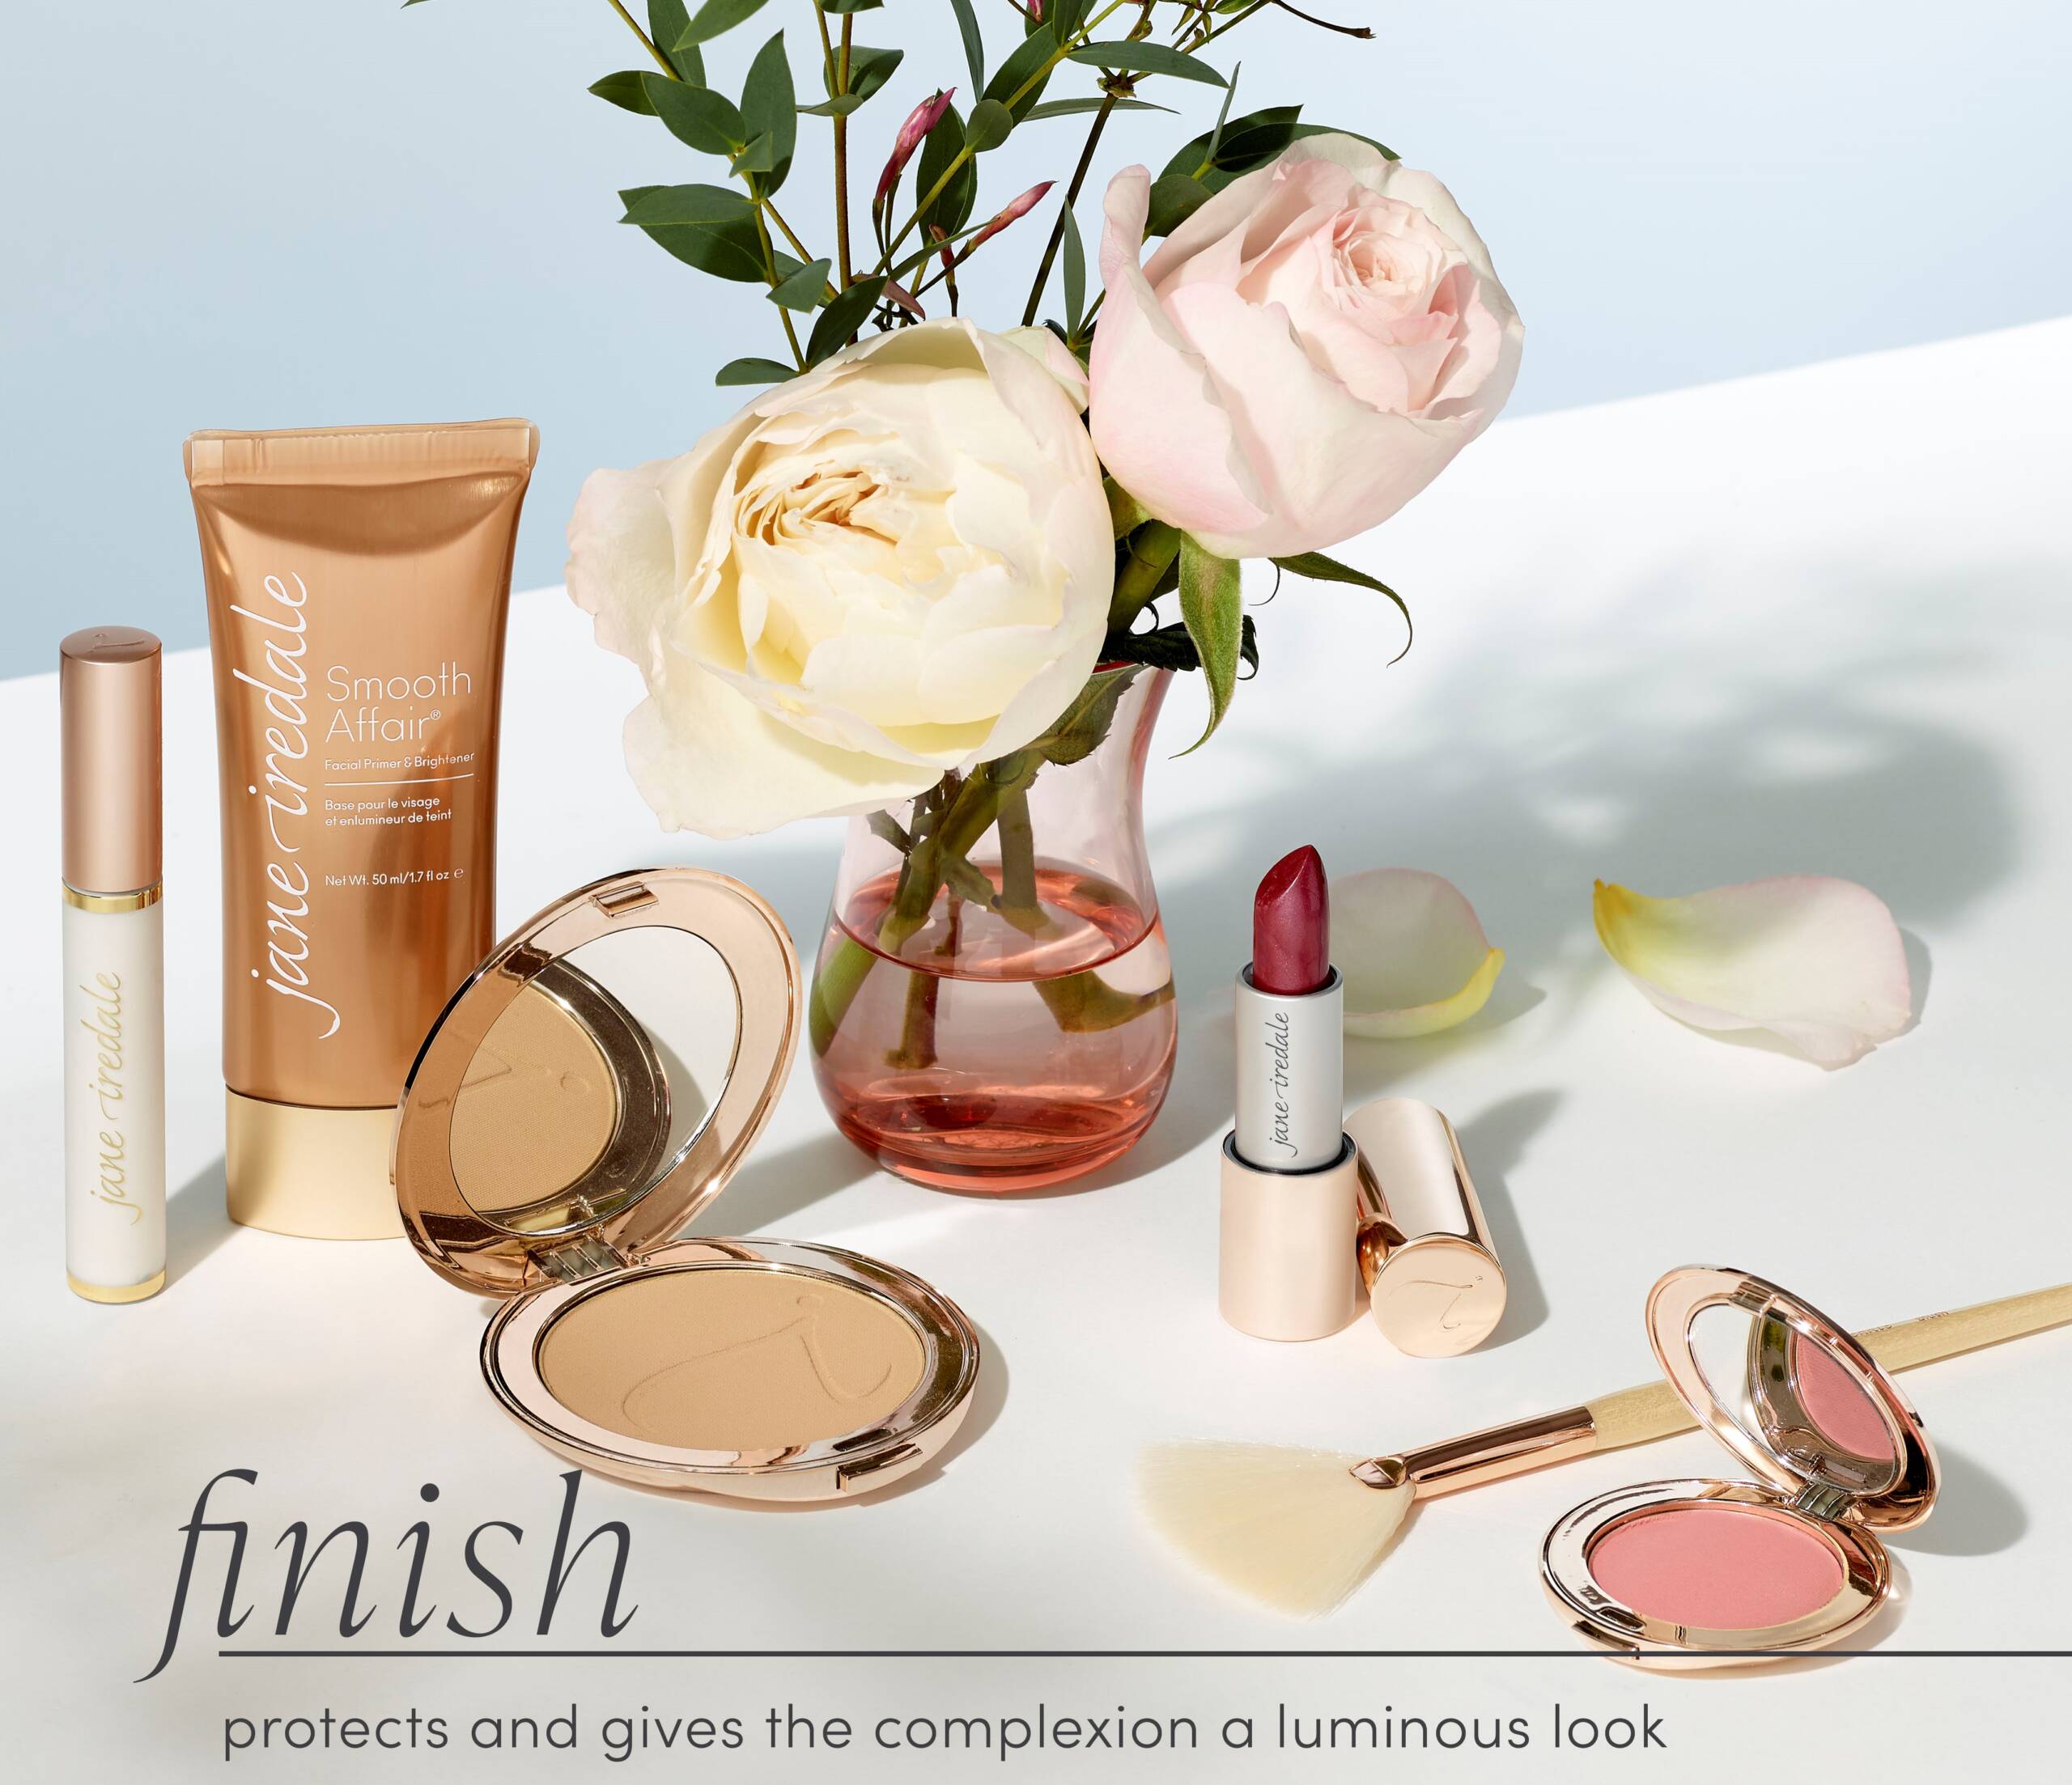 Jane Iredale products for your skin